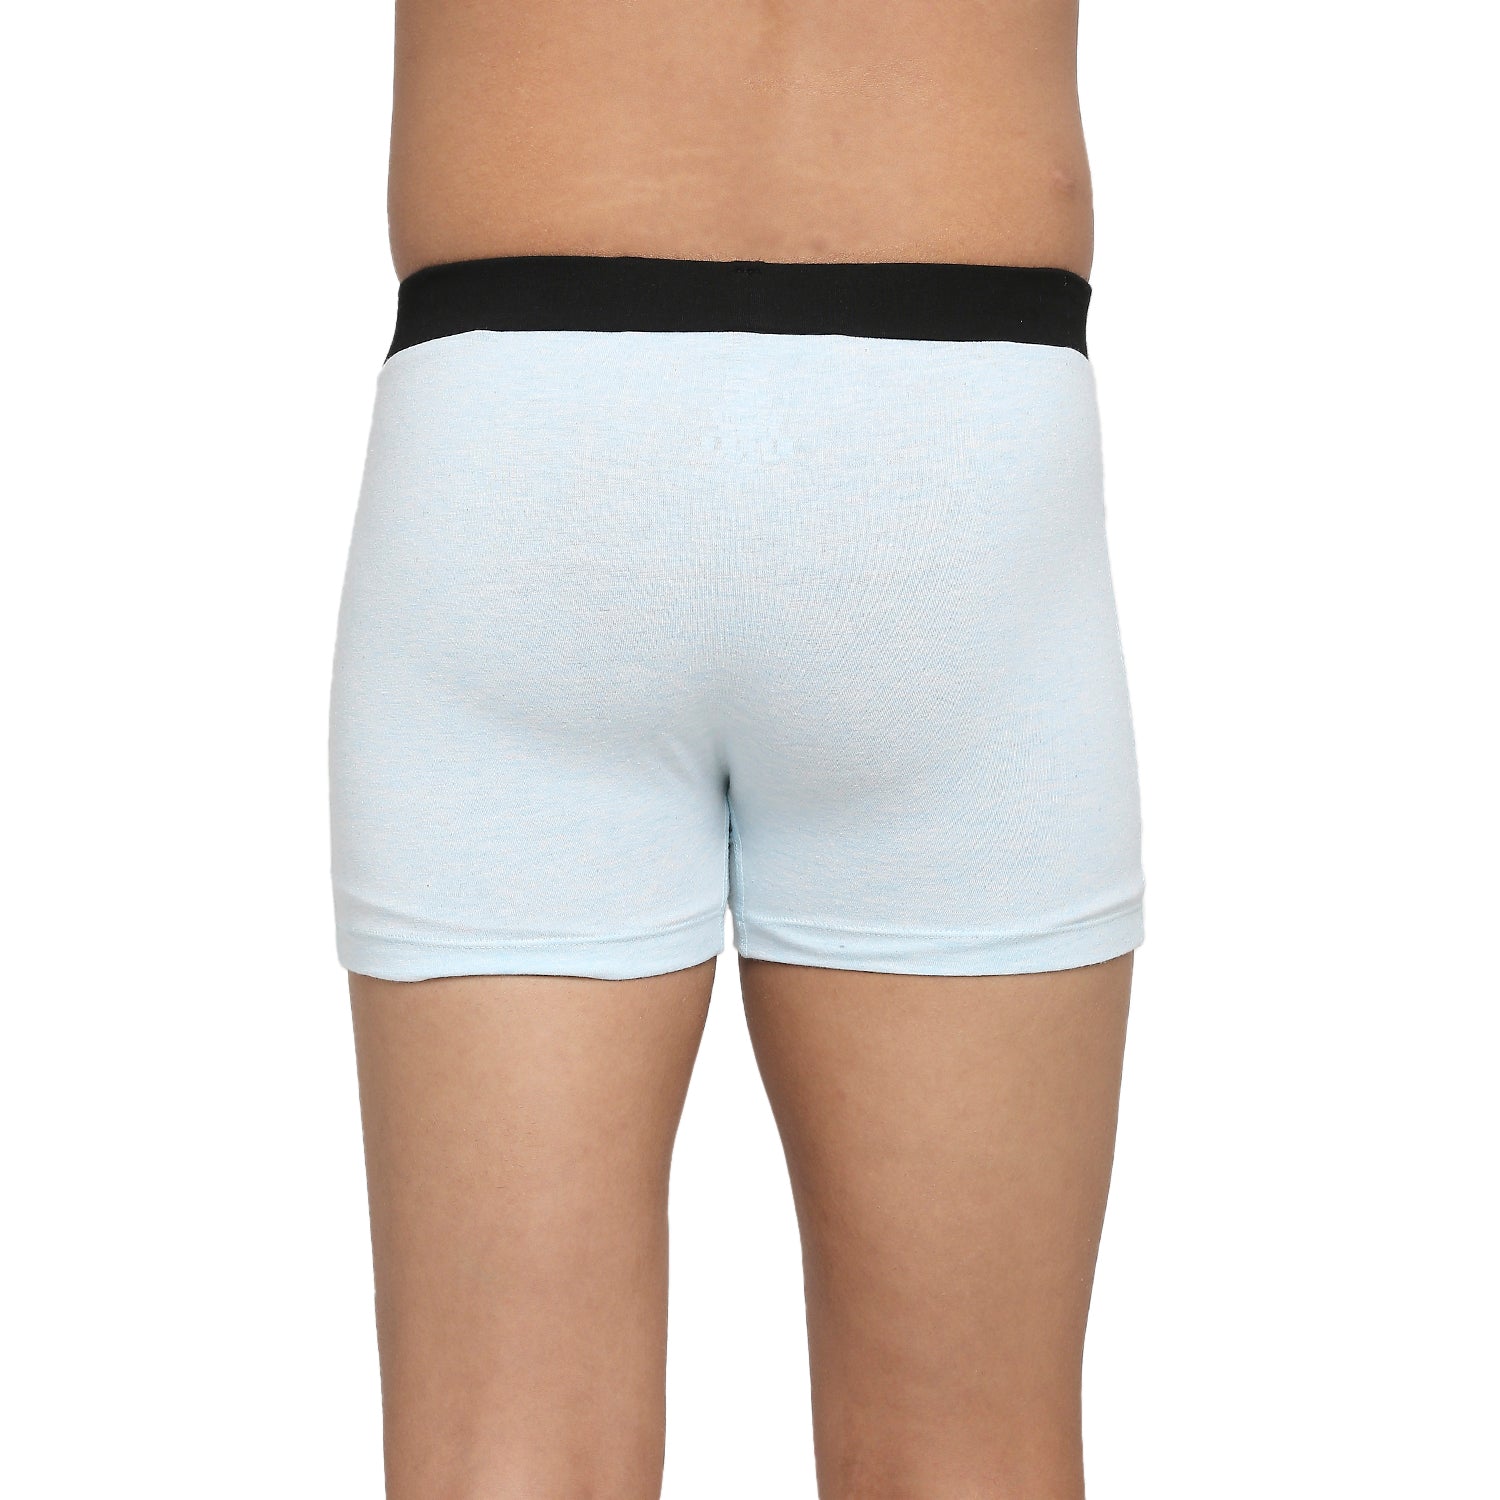 FRENCHIE Teenagers Cotton Trunk Dark Gray and Aqua - Pack of 2